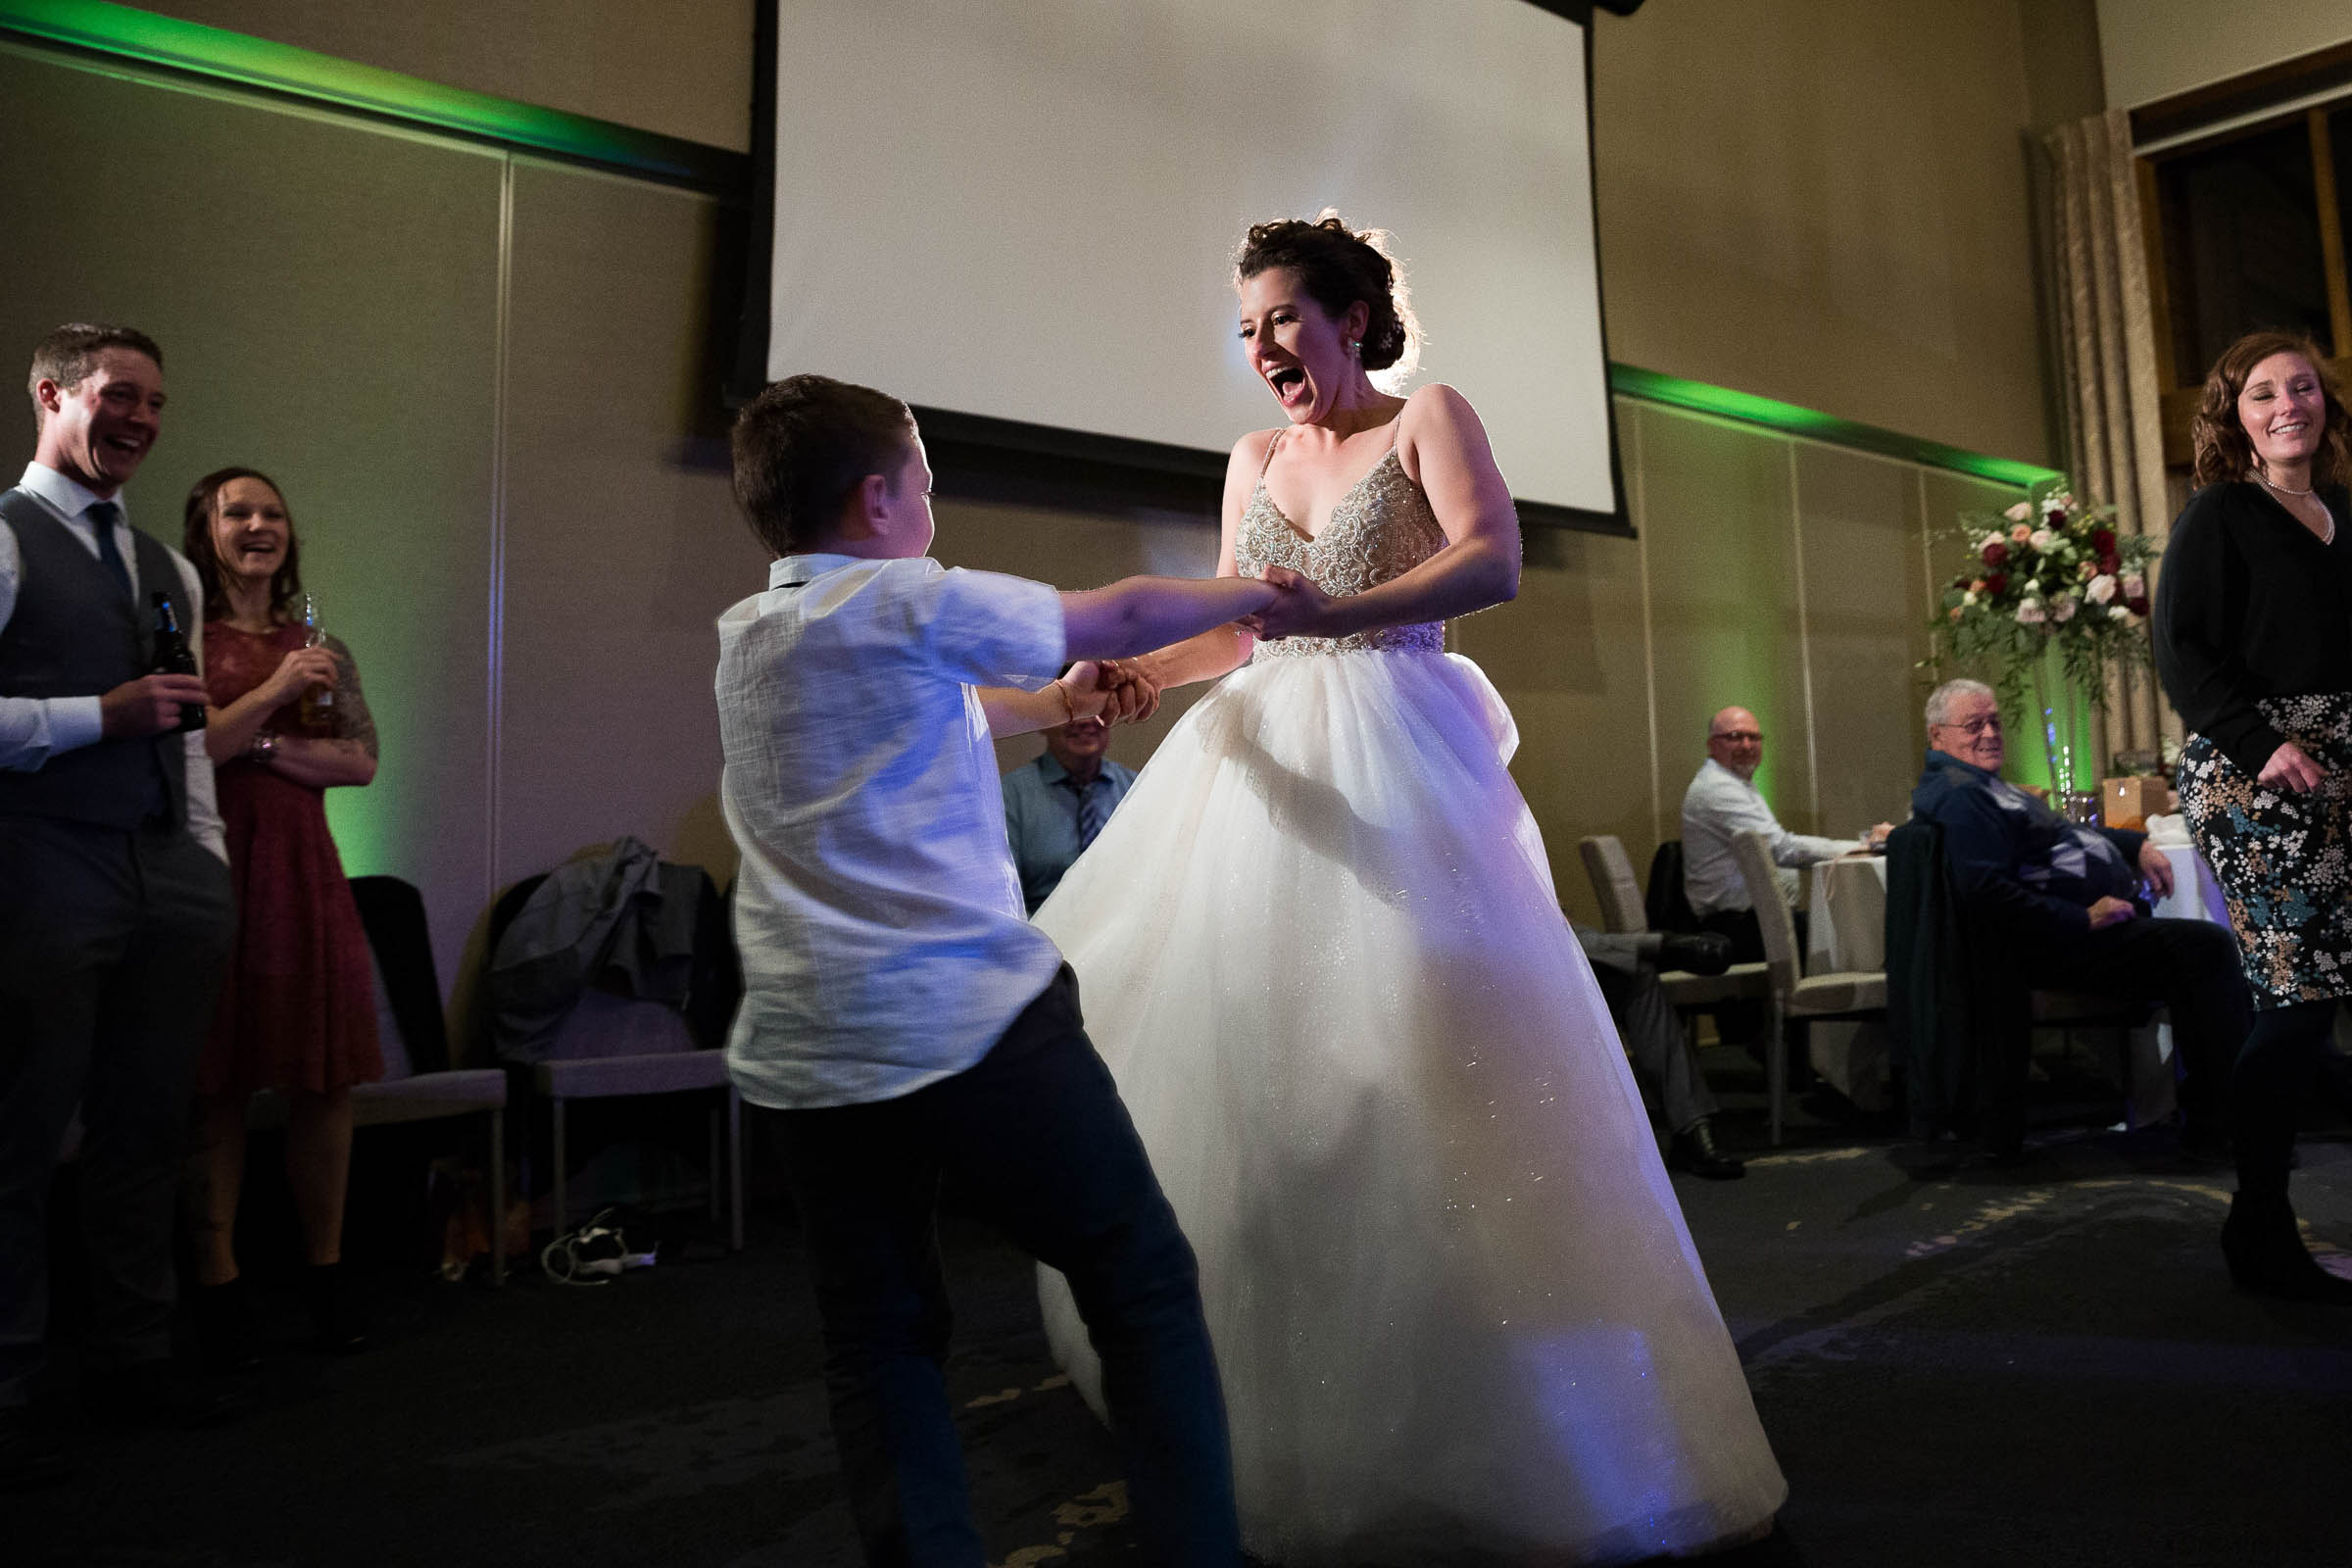 Bride smiling and dancing with child at wedding